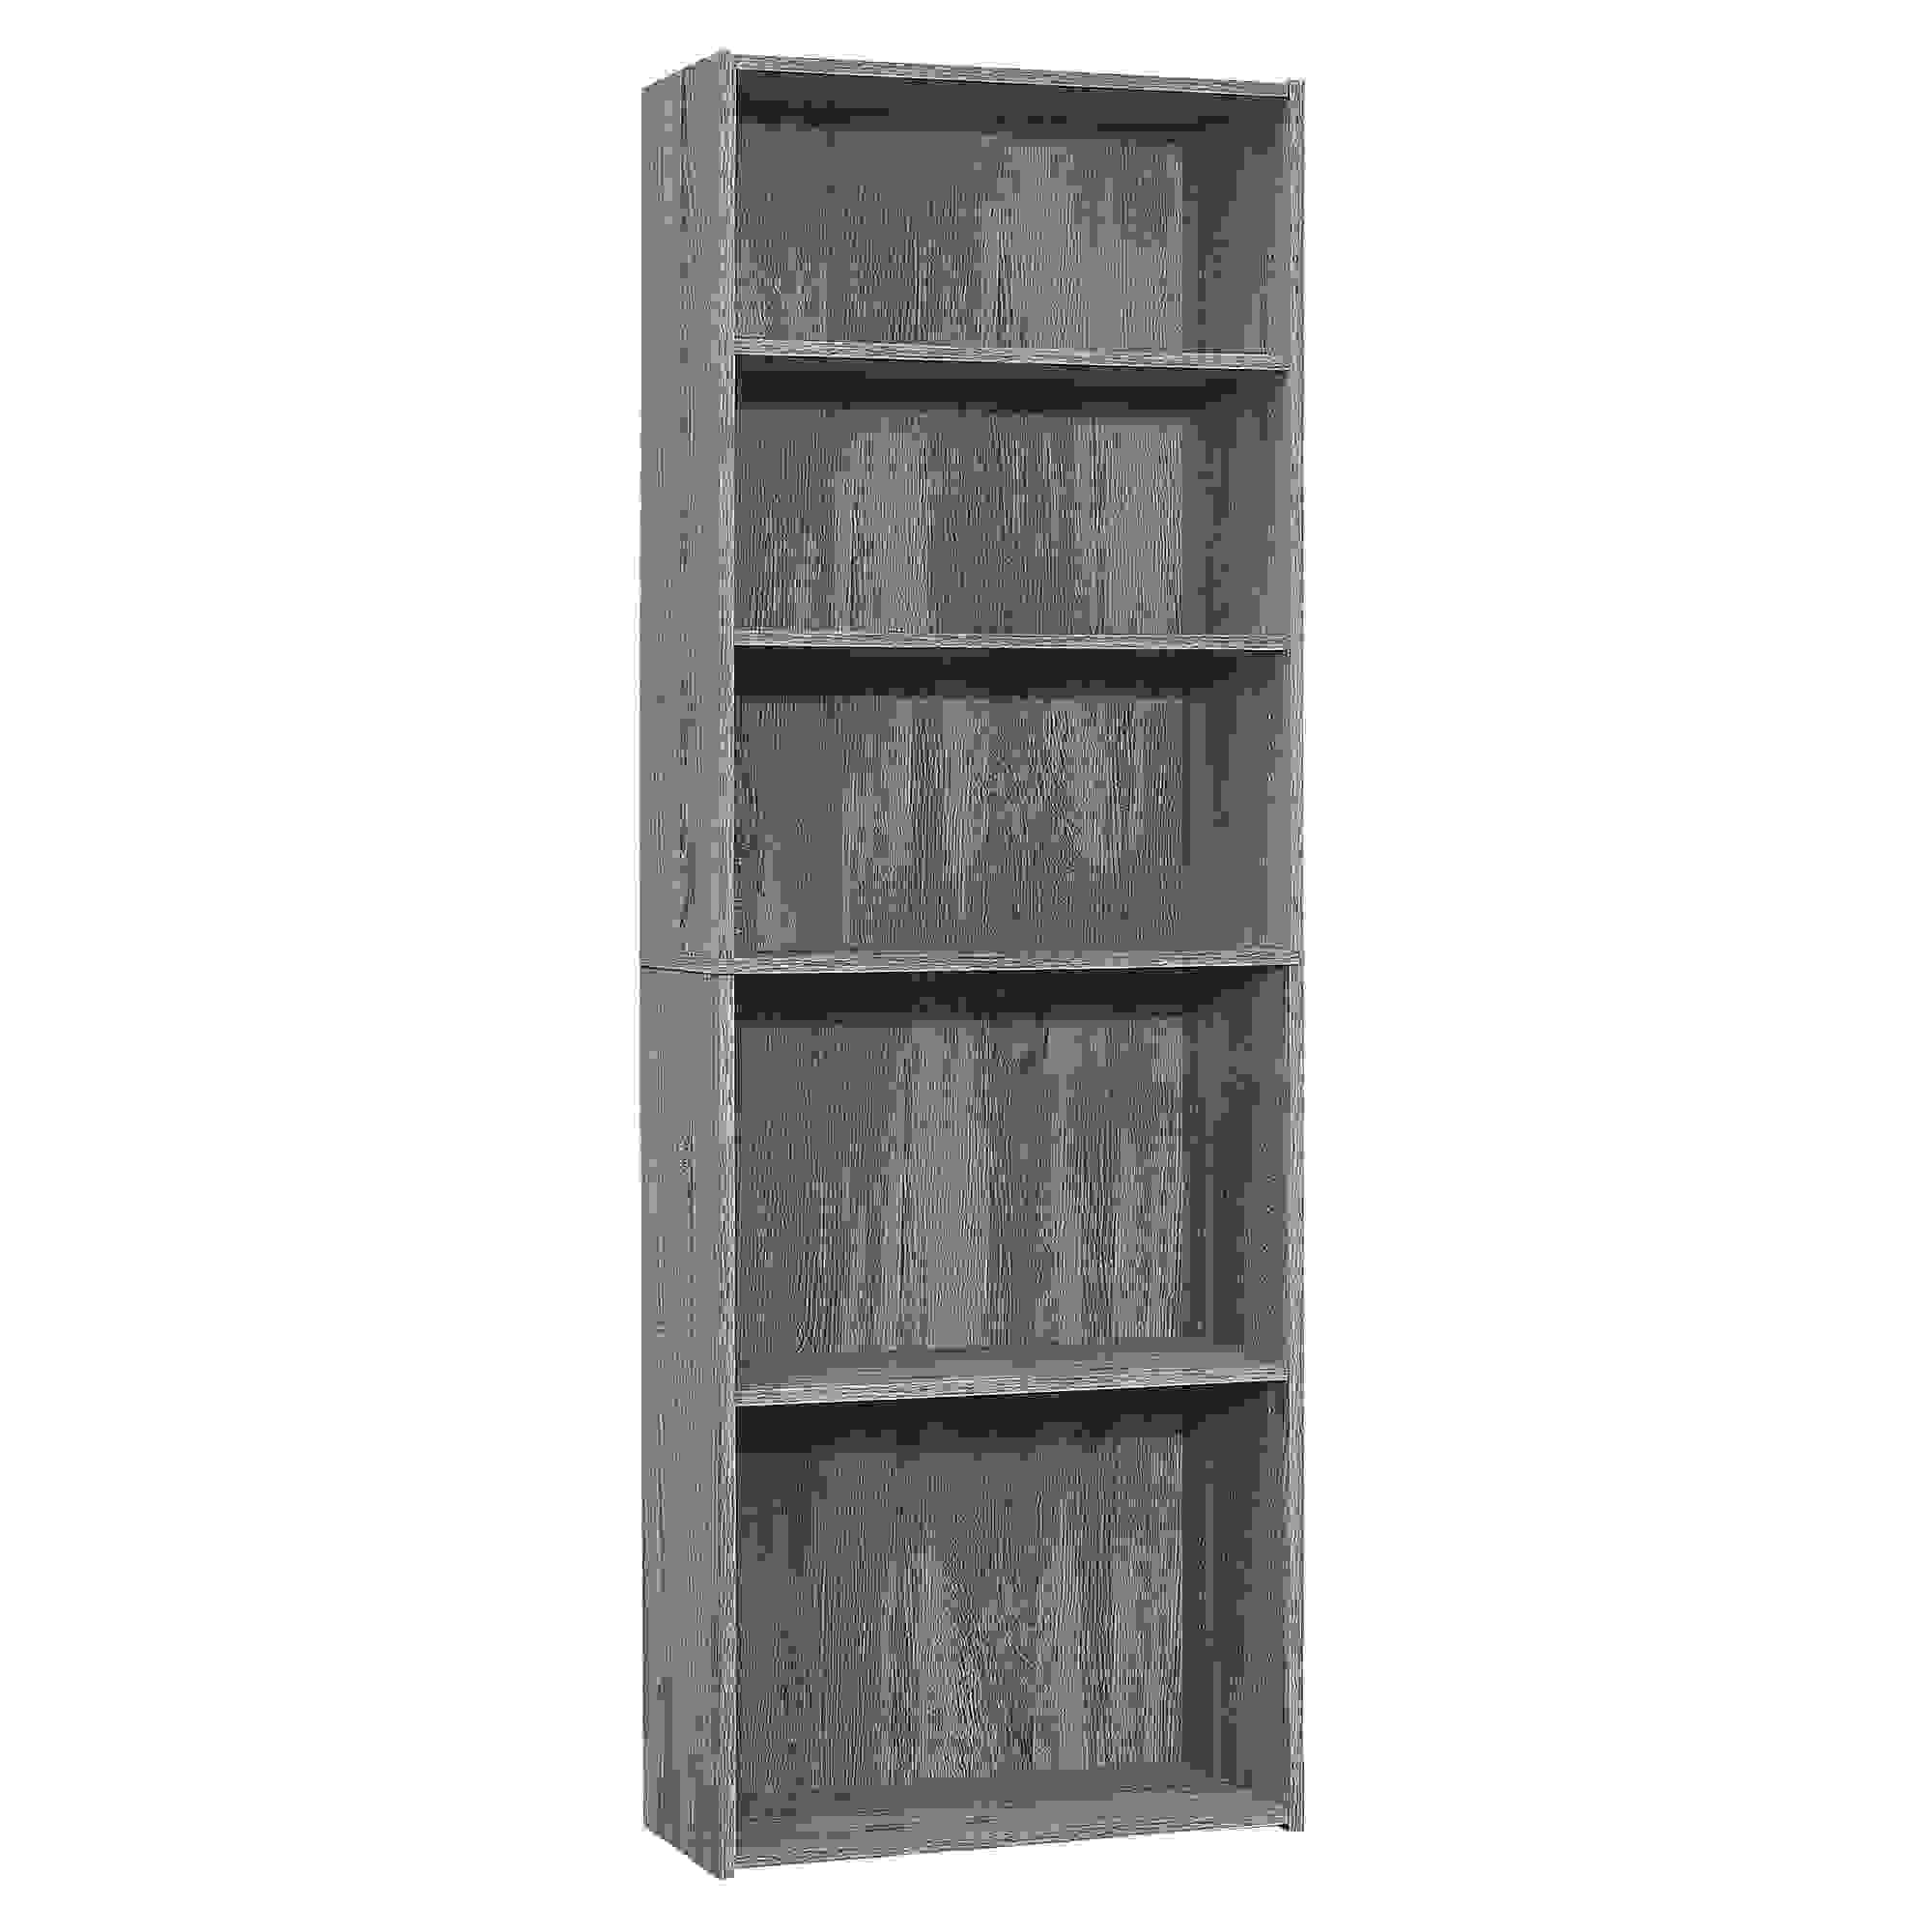 BOOKCASE - 72"H / DARK TAUPE WITH 5 SHELVES